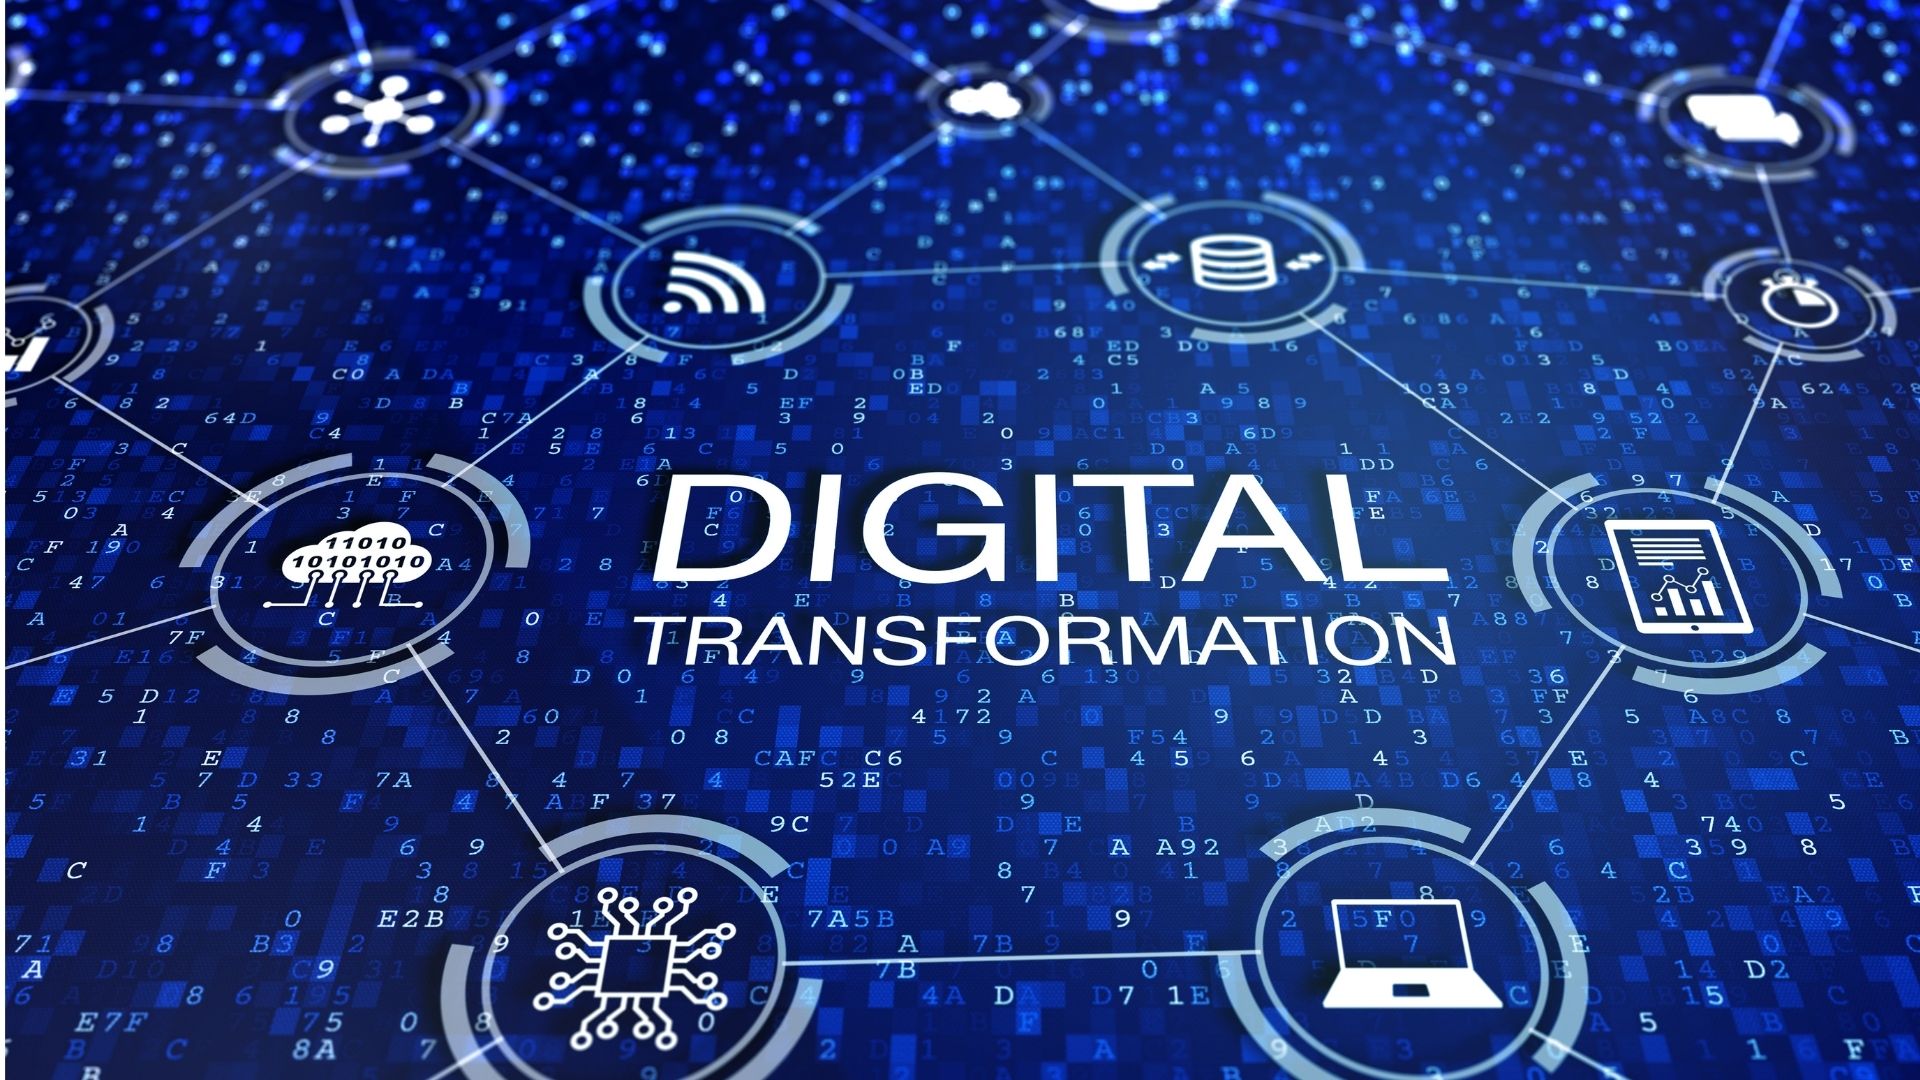 How Are Governments Going Under Digital Transformation & Its Benefits?